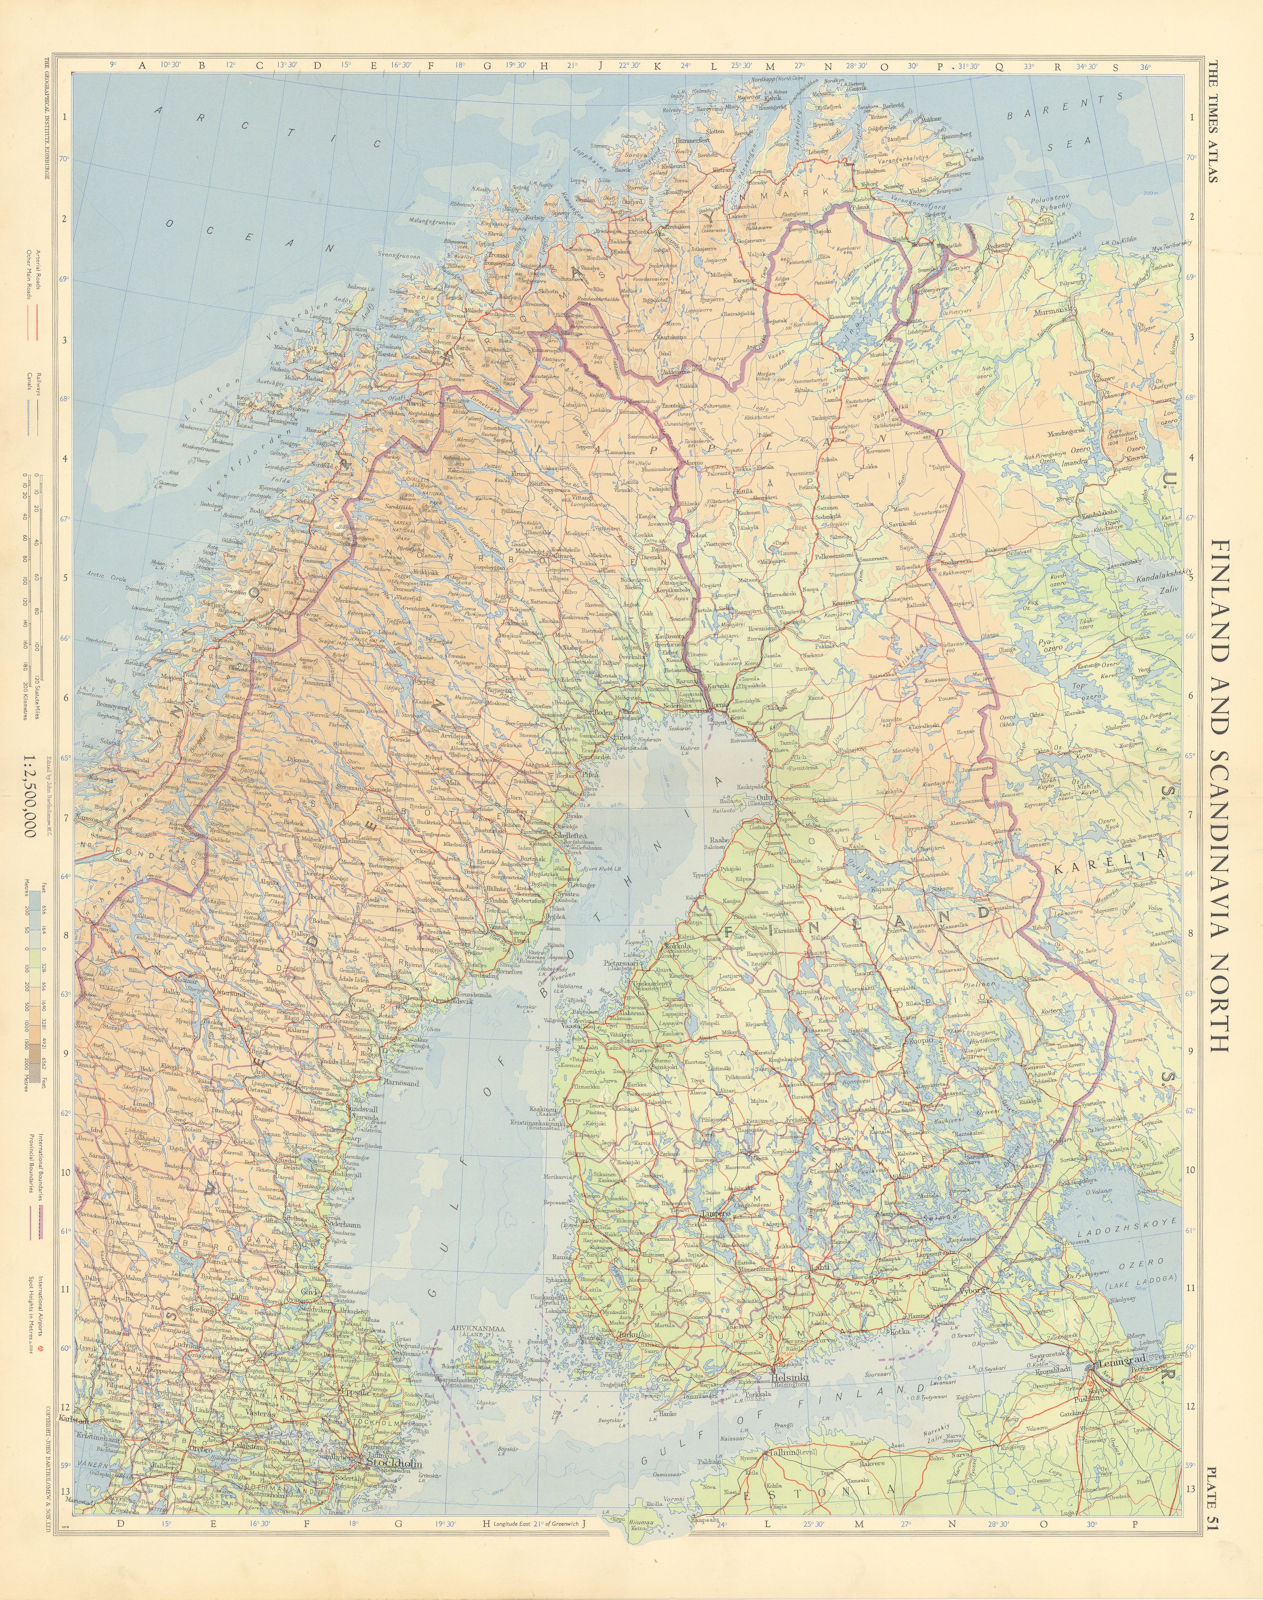 Associate Product Finland & northern Scandinavia. Sweden & Norway. Gulf of Bothnia. TIMES 1955 map